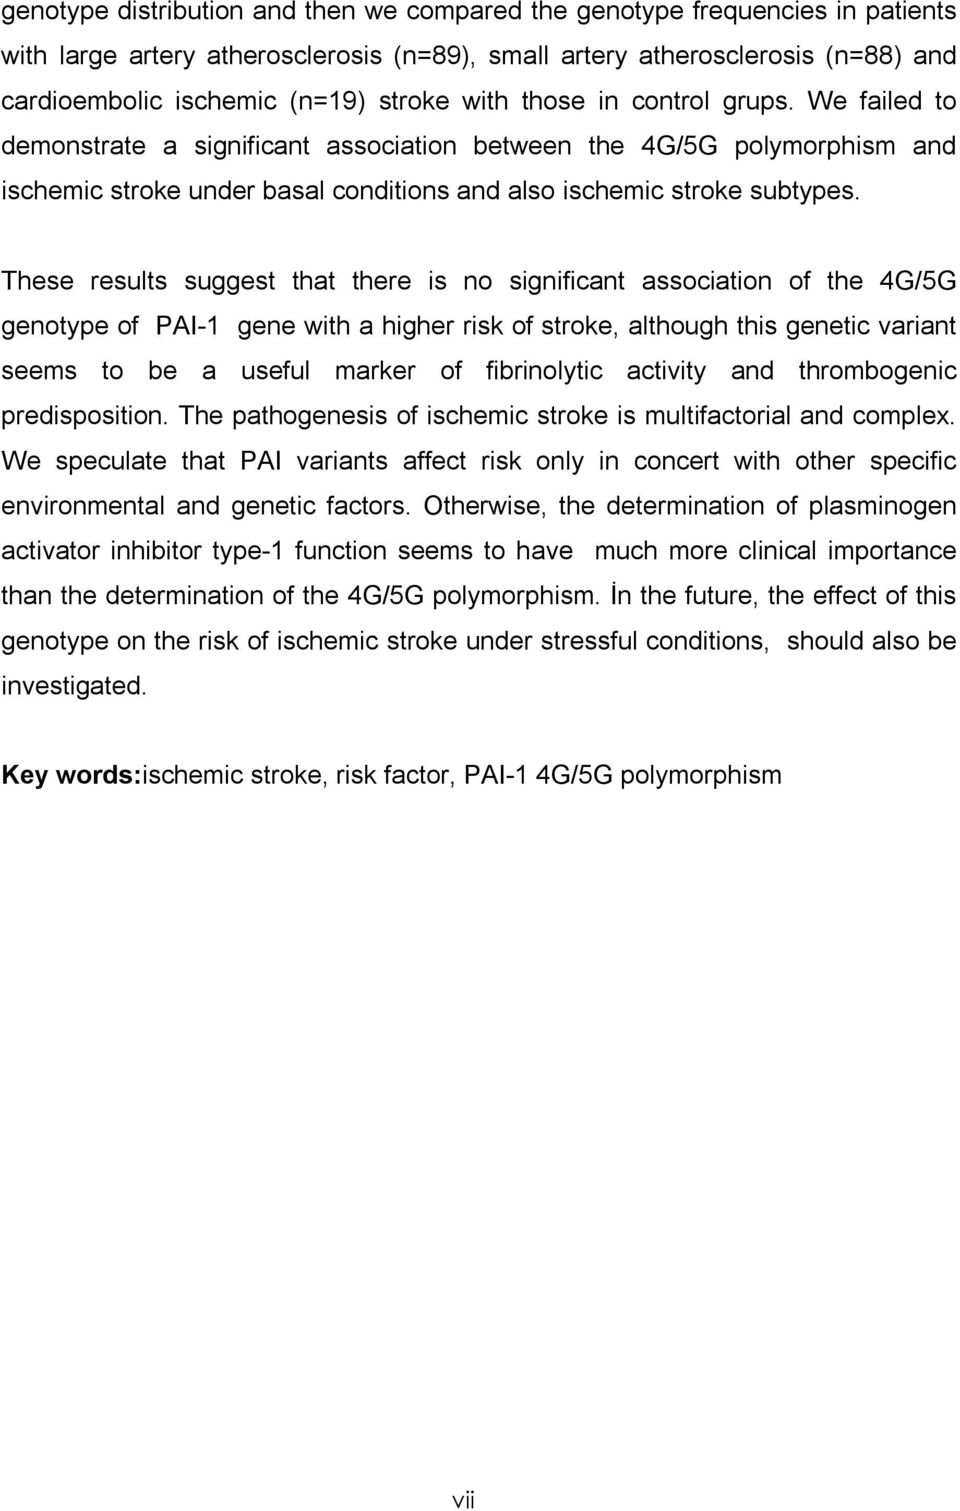 These results suggest that there is no significant association of the 4G/5G genotype of PAI-1 gene with a higher risk of stroke, although this genetic variant seems to be a useful marker of